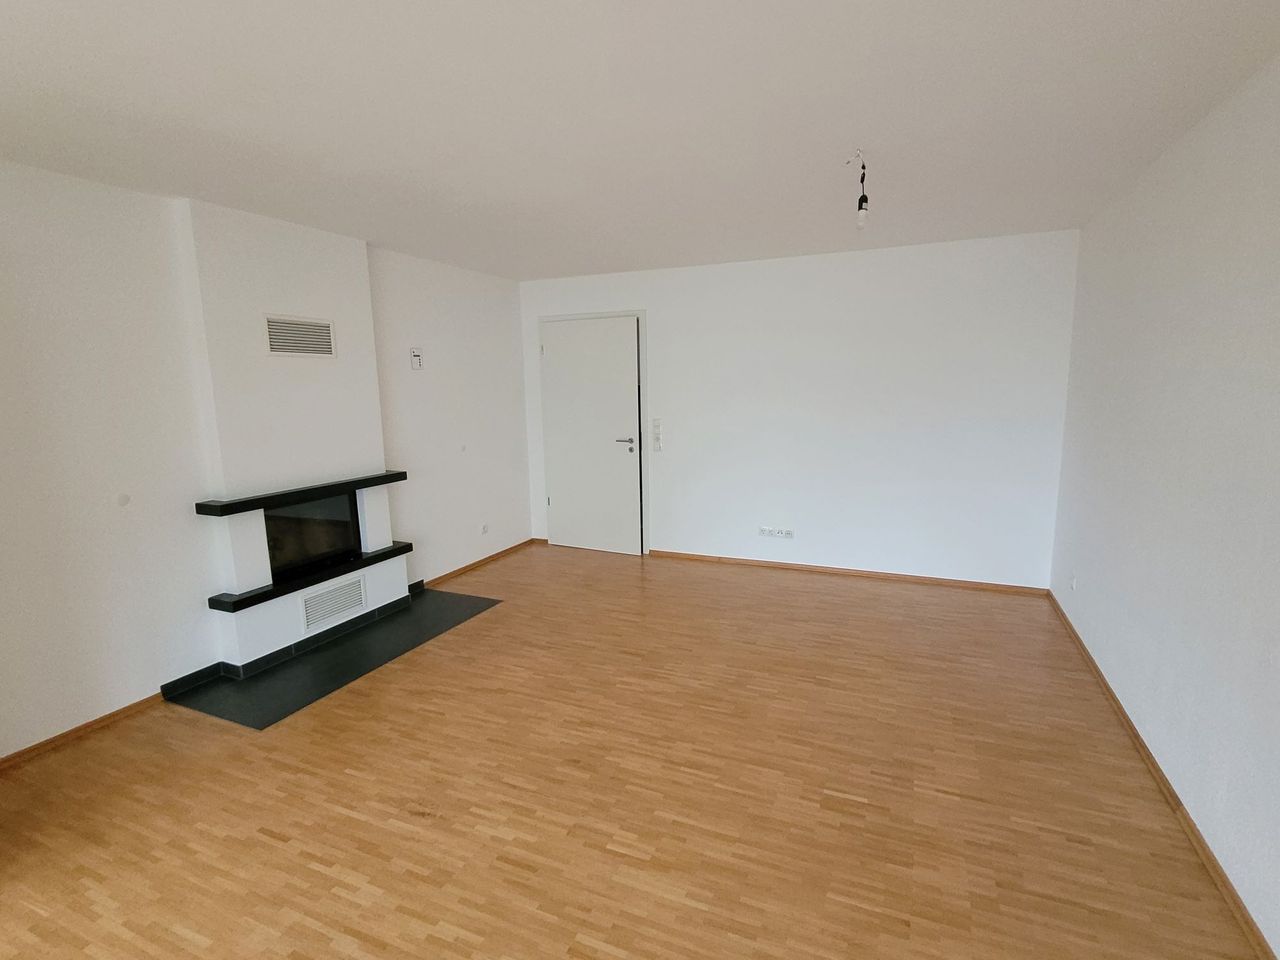 Spacious furnished coliving apartment in Frankfurt – EUR 950 ALL INCLUSIVE for 1 person